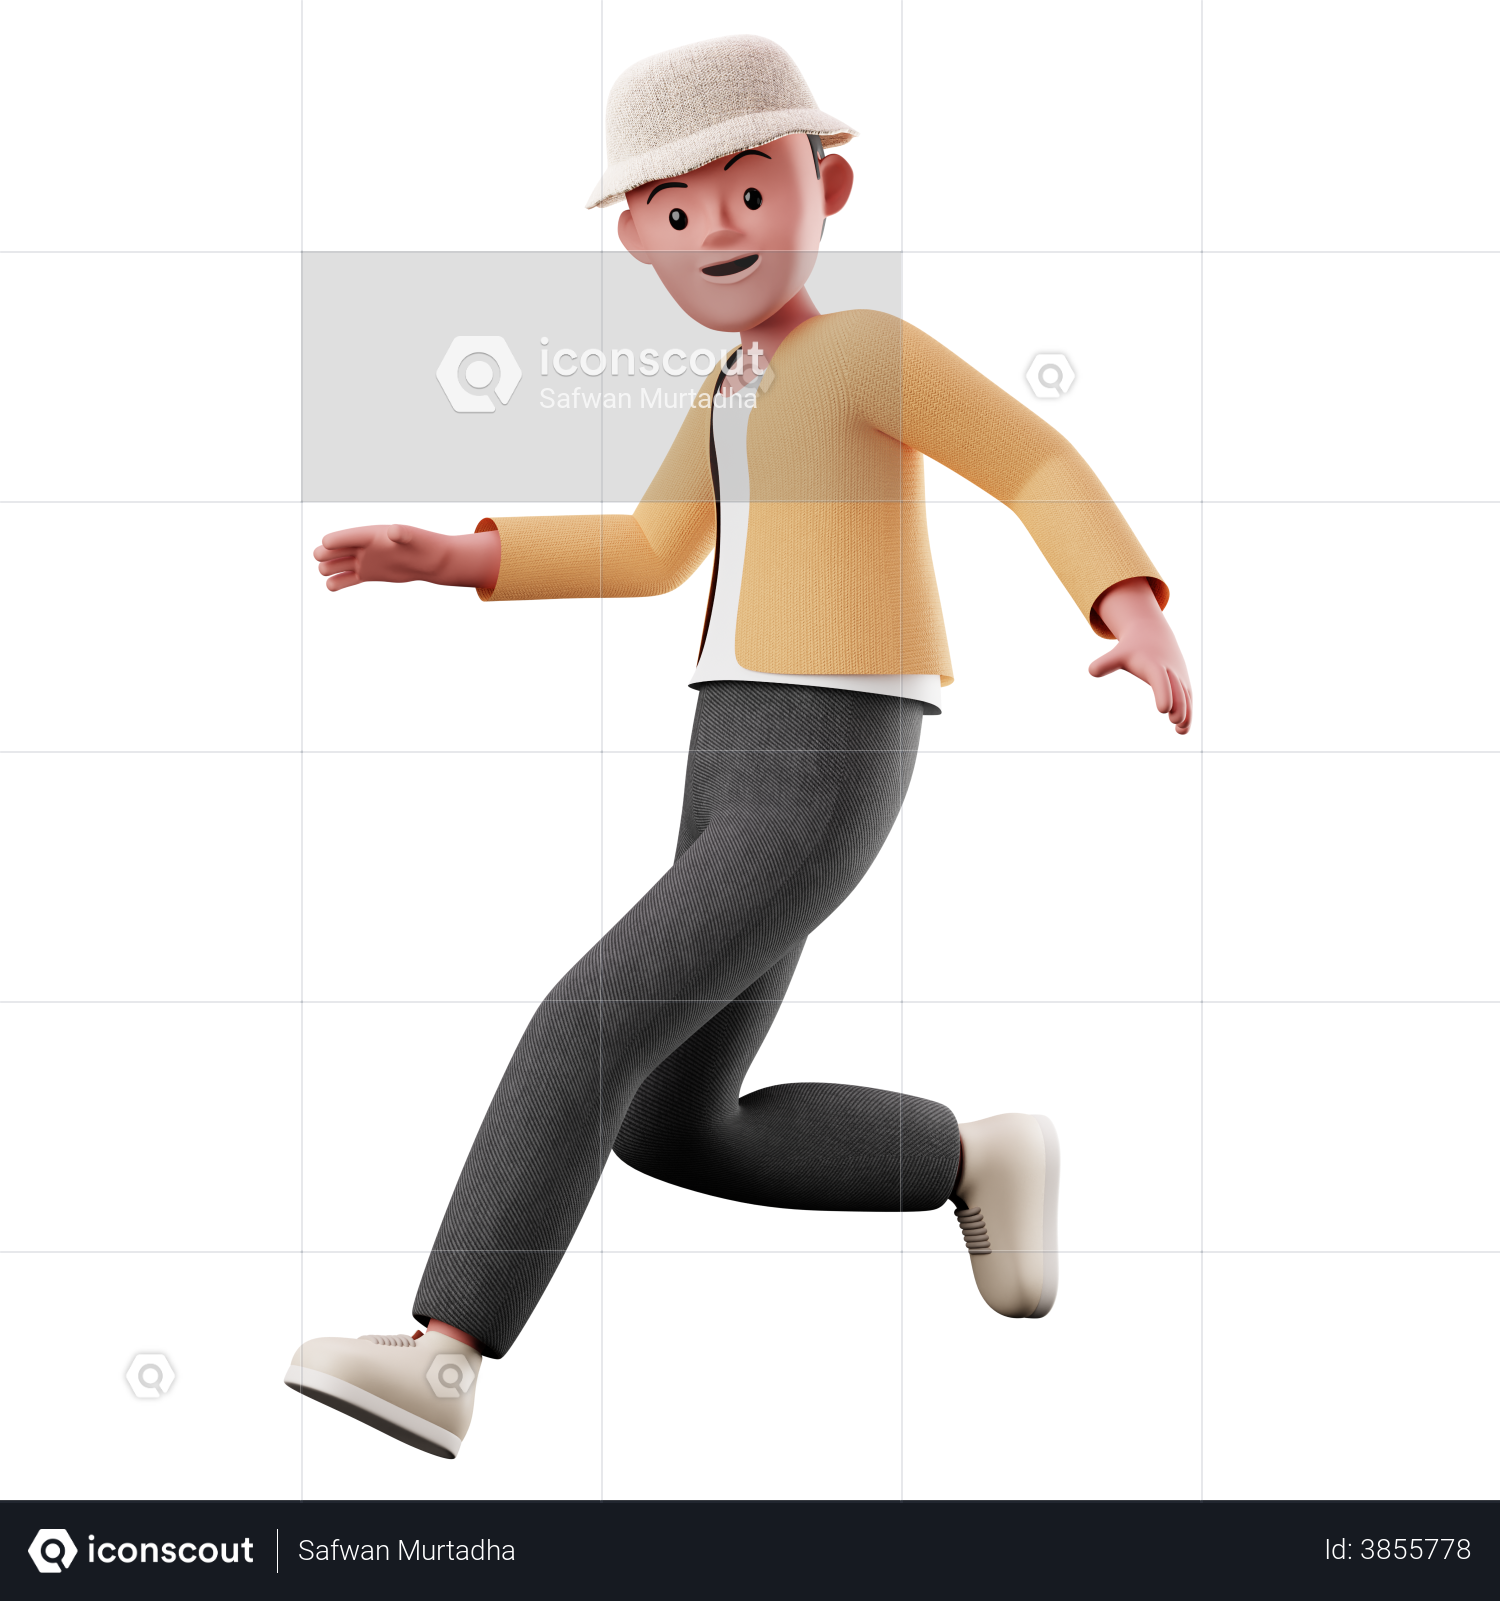 Exclamation Point 3d Orange Running Man Raising Arm Up Winner Pose Victory  Gesture Stock Photo - Download Image Now - iStock